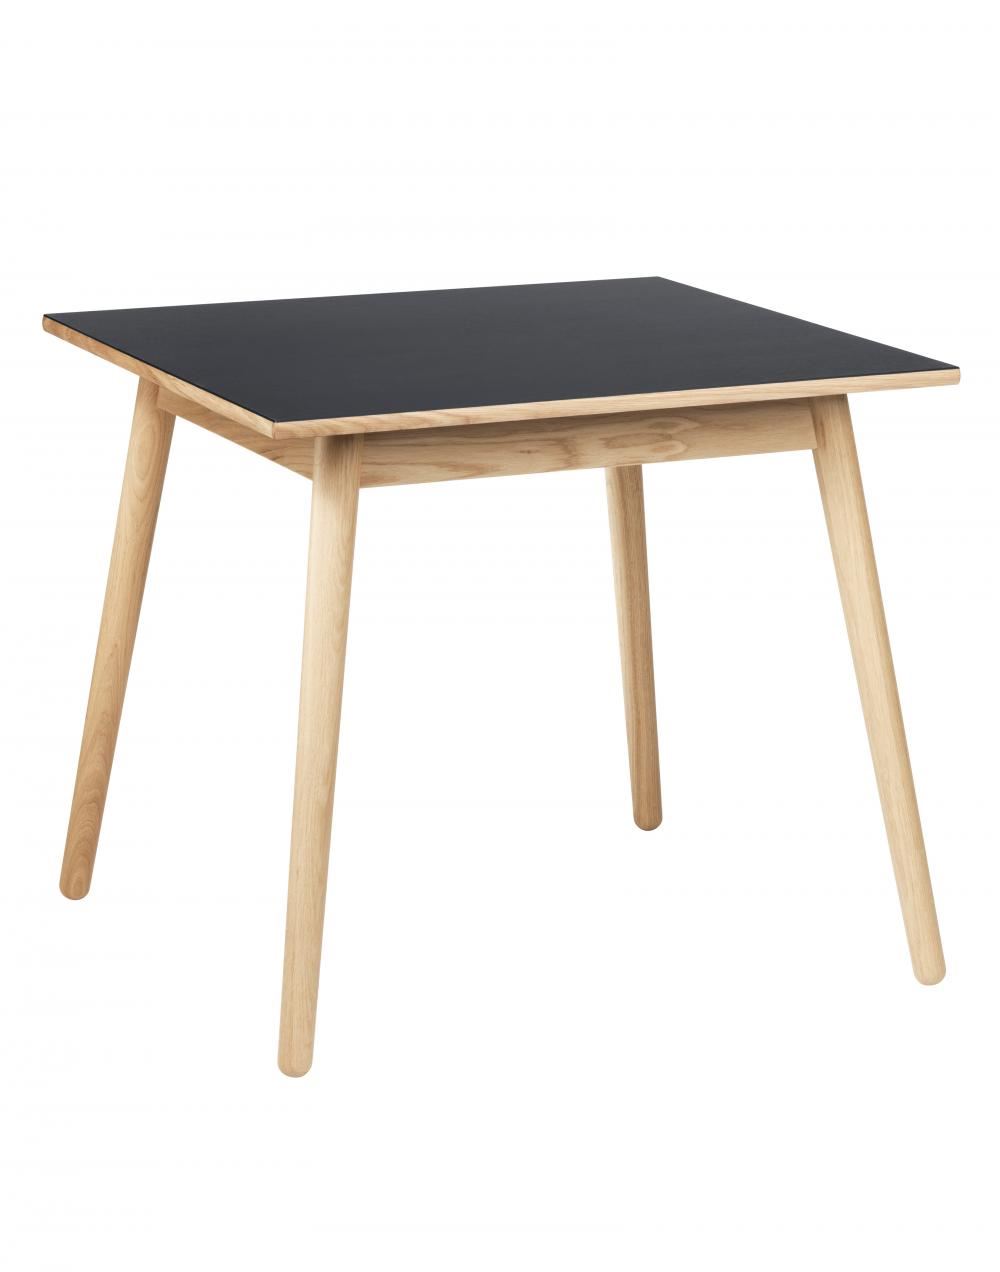 C35 Dining Table Small Medium Small Oak With Black Lino Top Beech With Black Lino Top